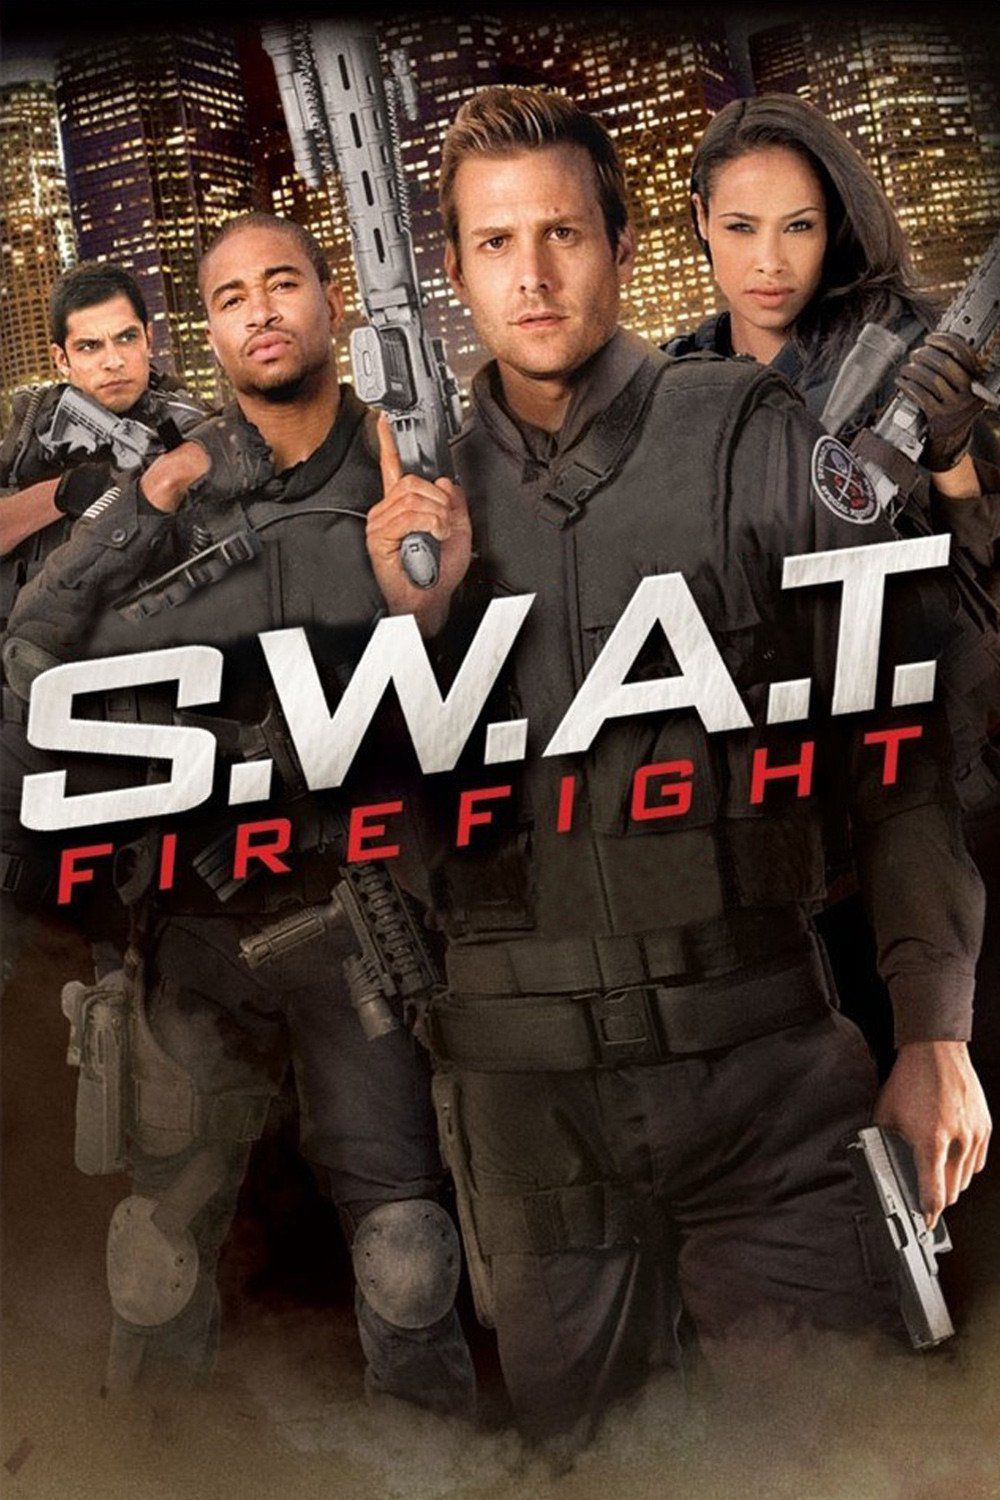 S.W.A.T. 2 : Firefight - Film (2011) streaming VF gratuit complet